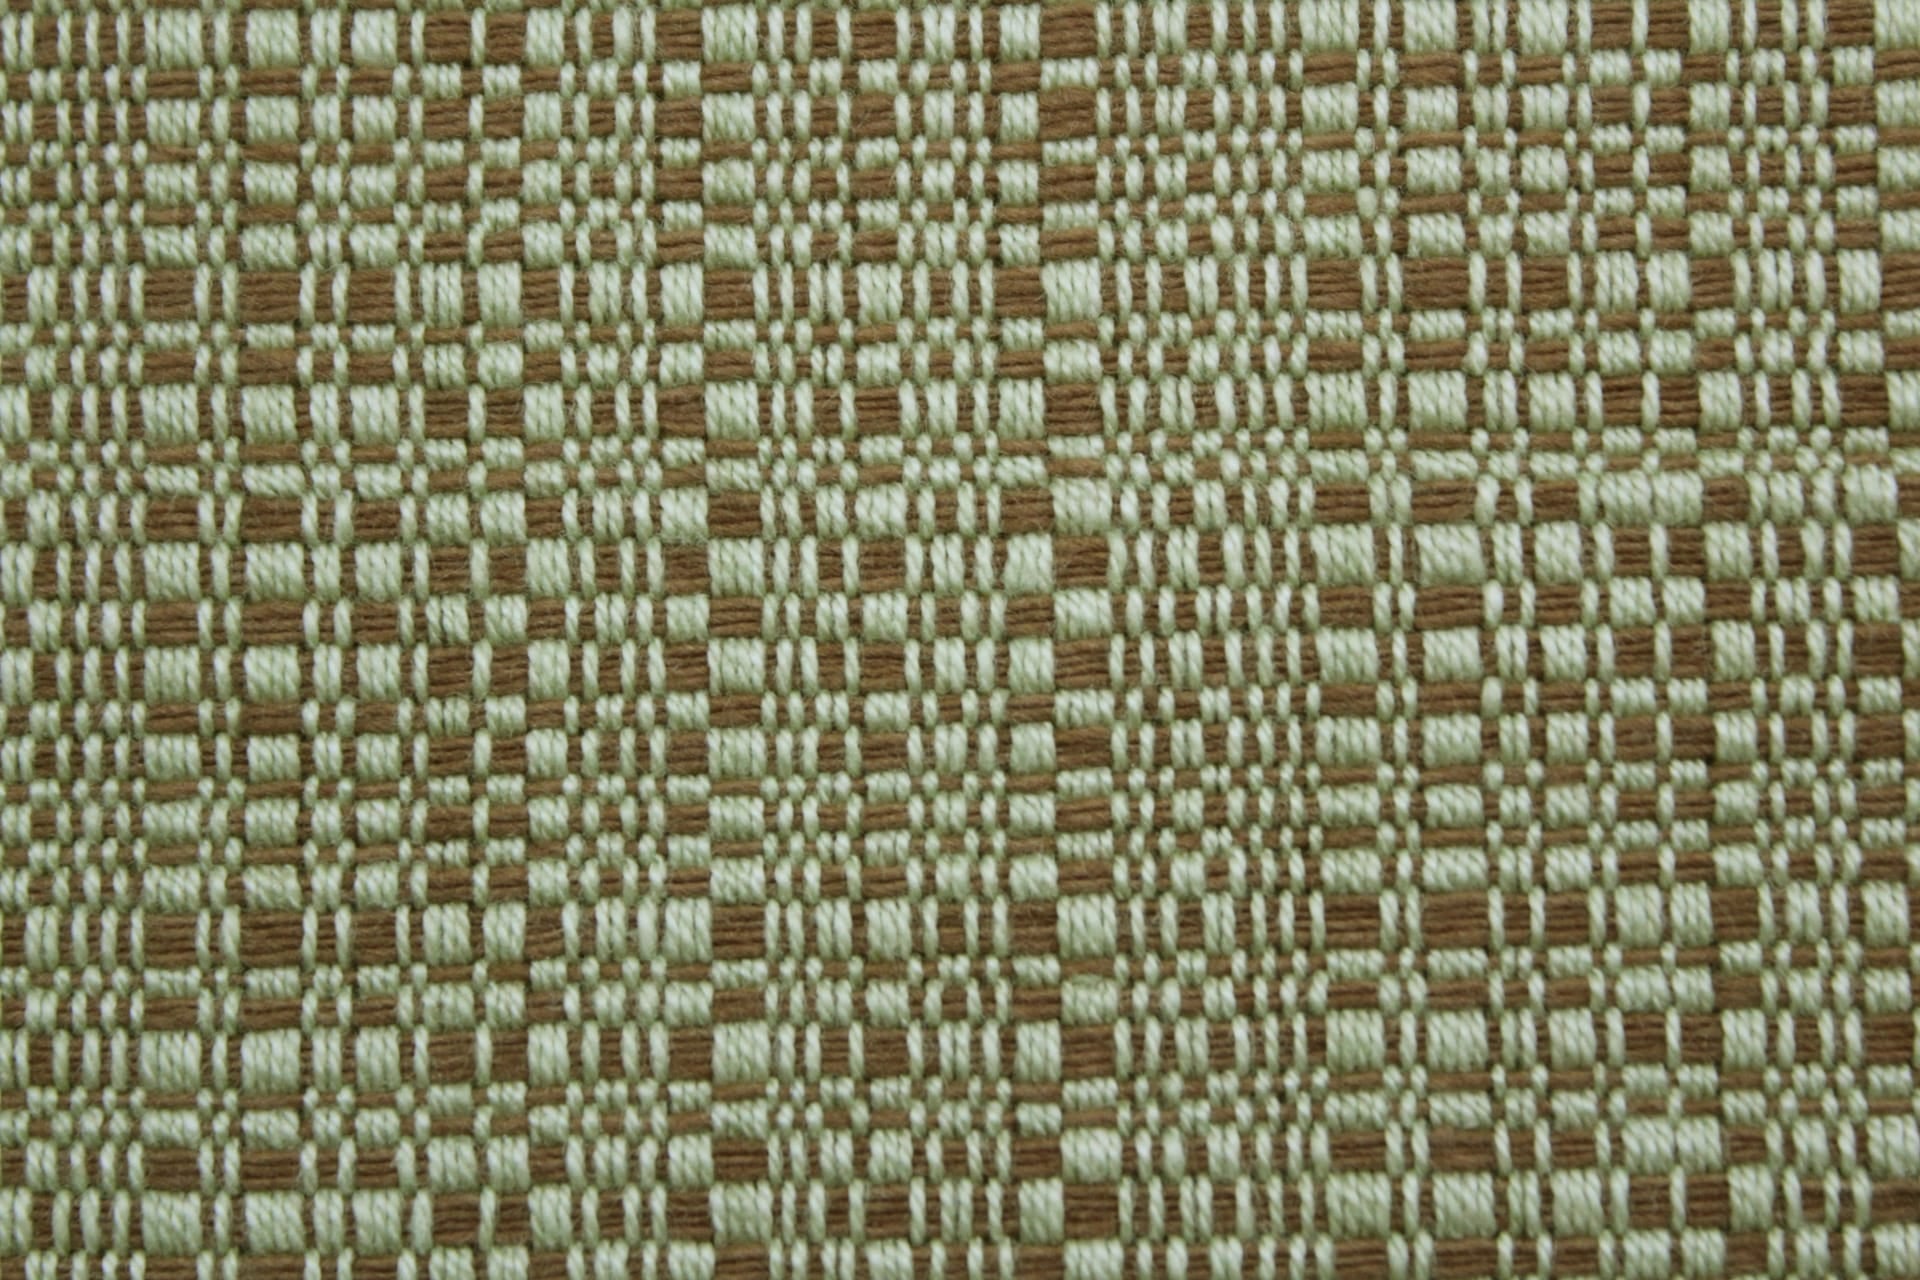 Green Handloom Corded Weave 330 GSM Plain Cotton Fabric (122 cms) online in India